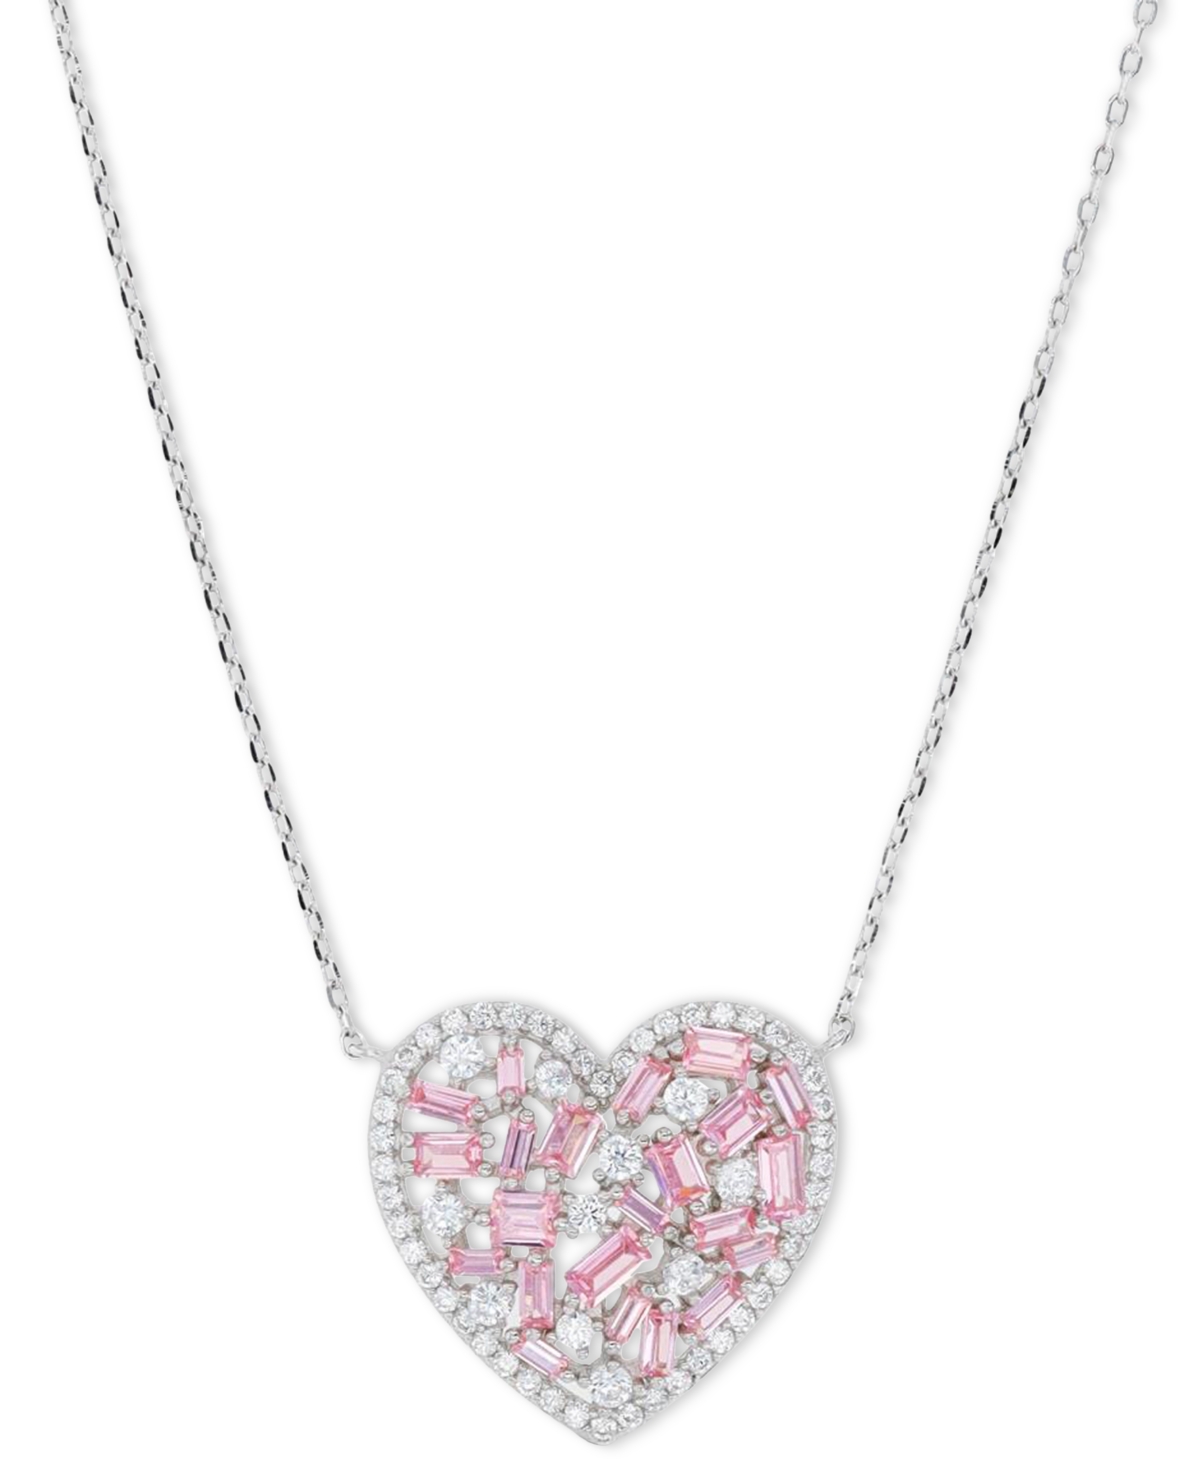 Macy's Pink & White Cubic Zirconia Heart Halo Pendant Necklace In Sterling Silver, 18" + 2" Extender